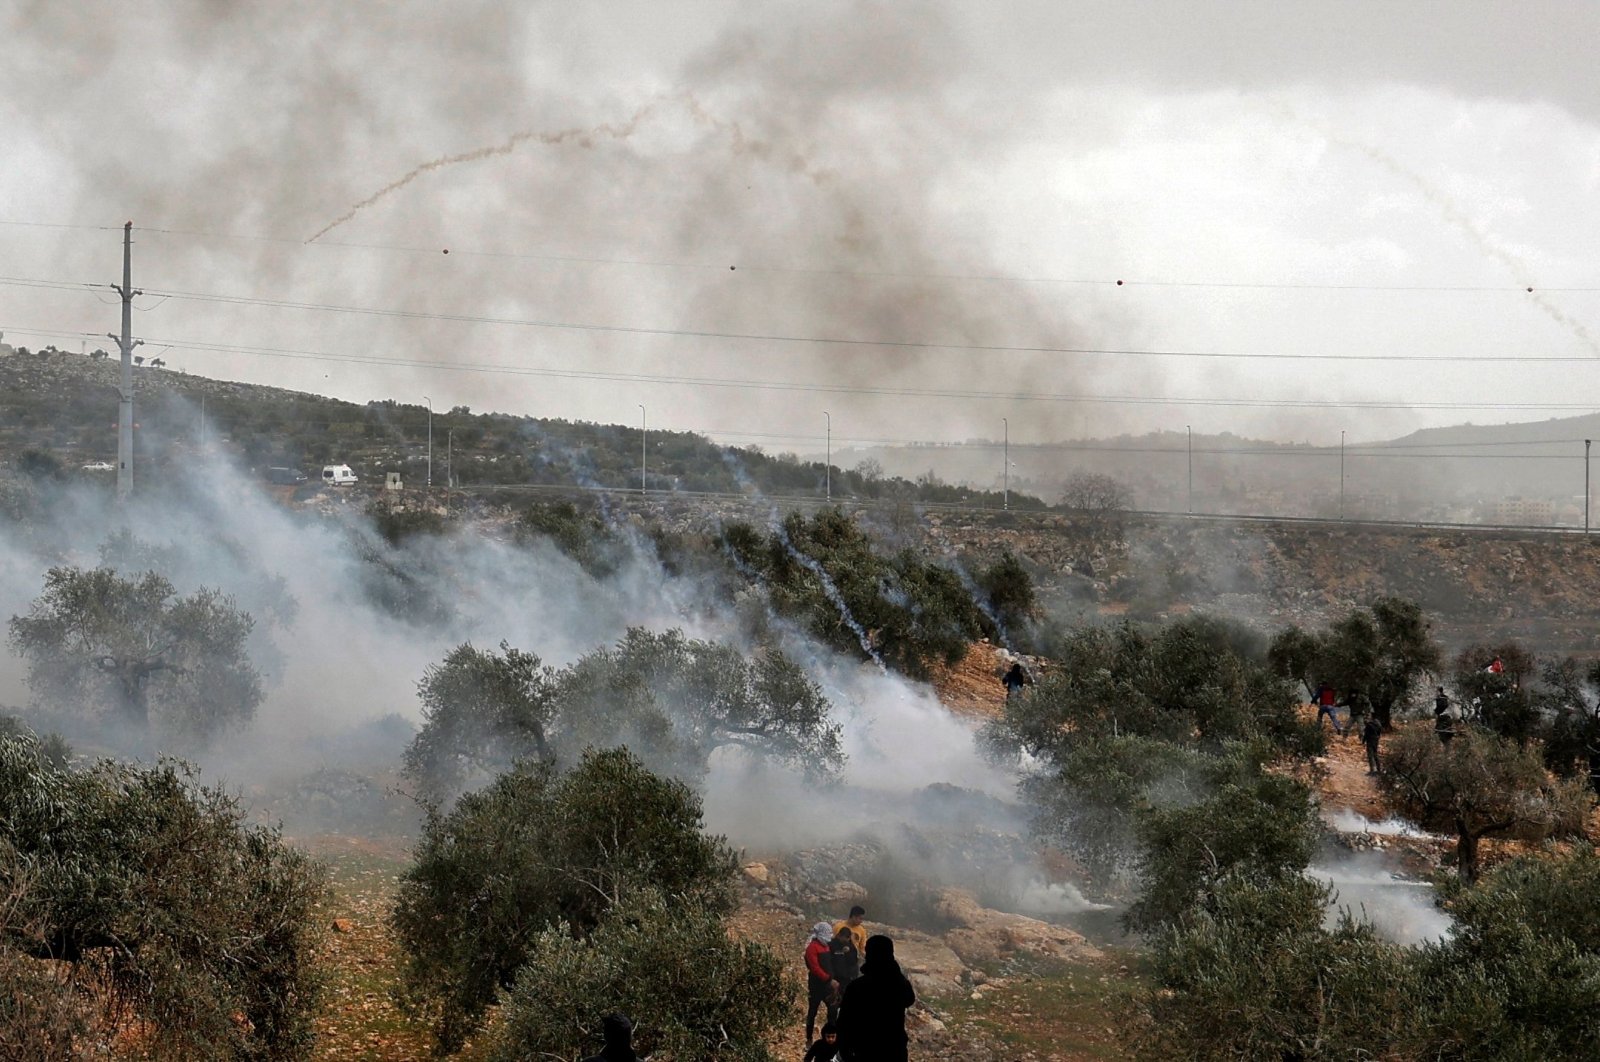 Palestinian protesters retreat as tear gas canisters fall amid clashes with Israeli security forces following a demonstration against settlements in the village of Beita in the occupied West Bank, Palestine, Feb. 4, 2022. (AFP Photo)